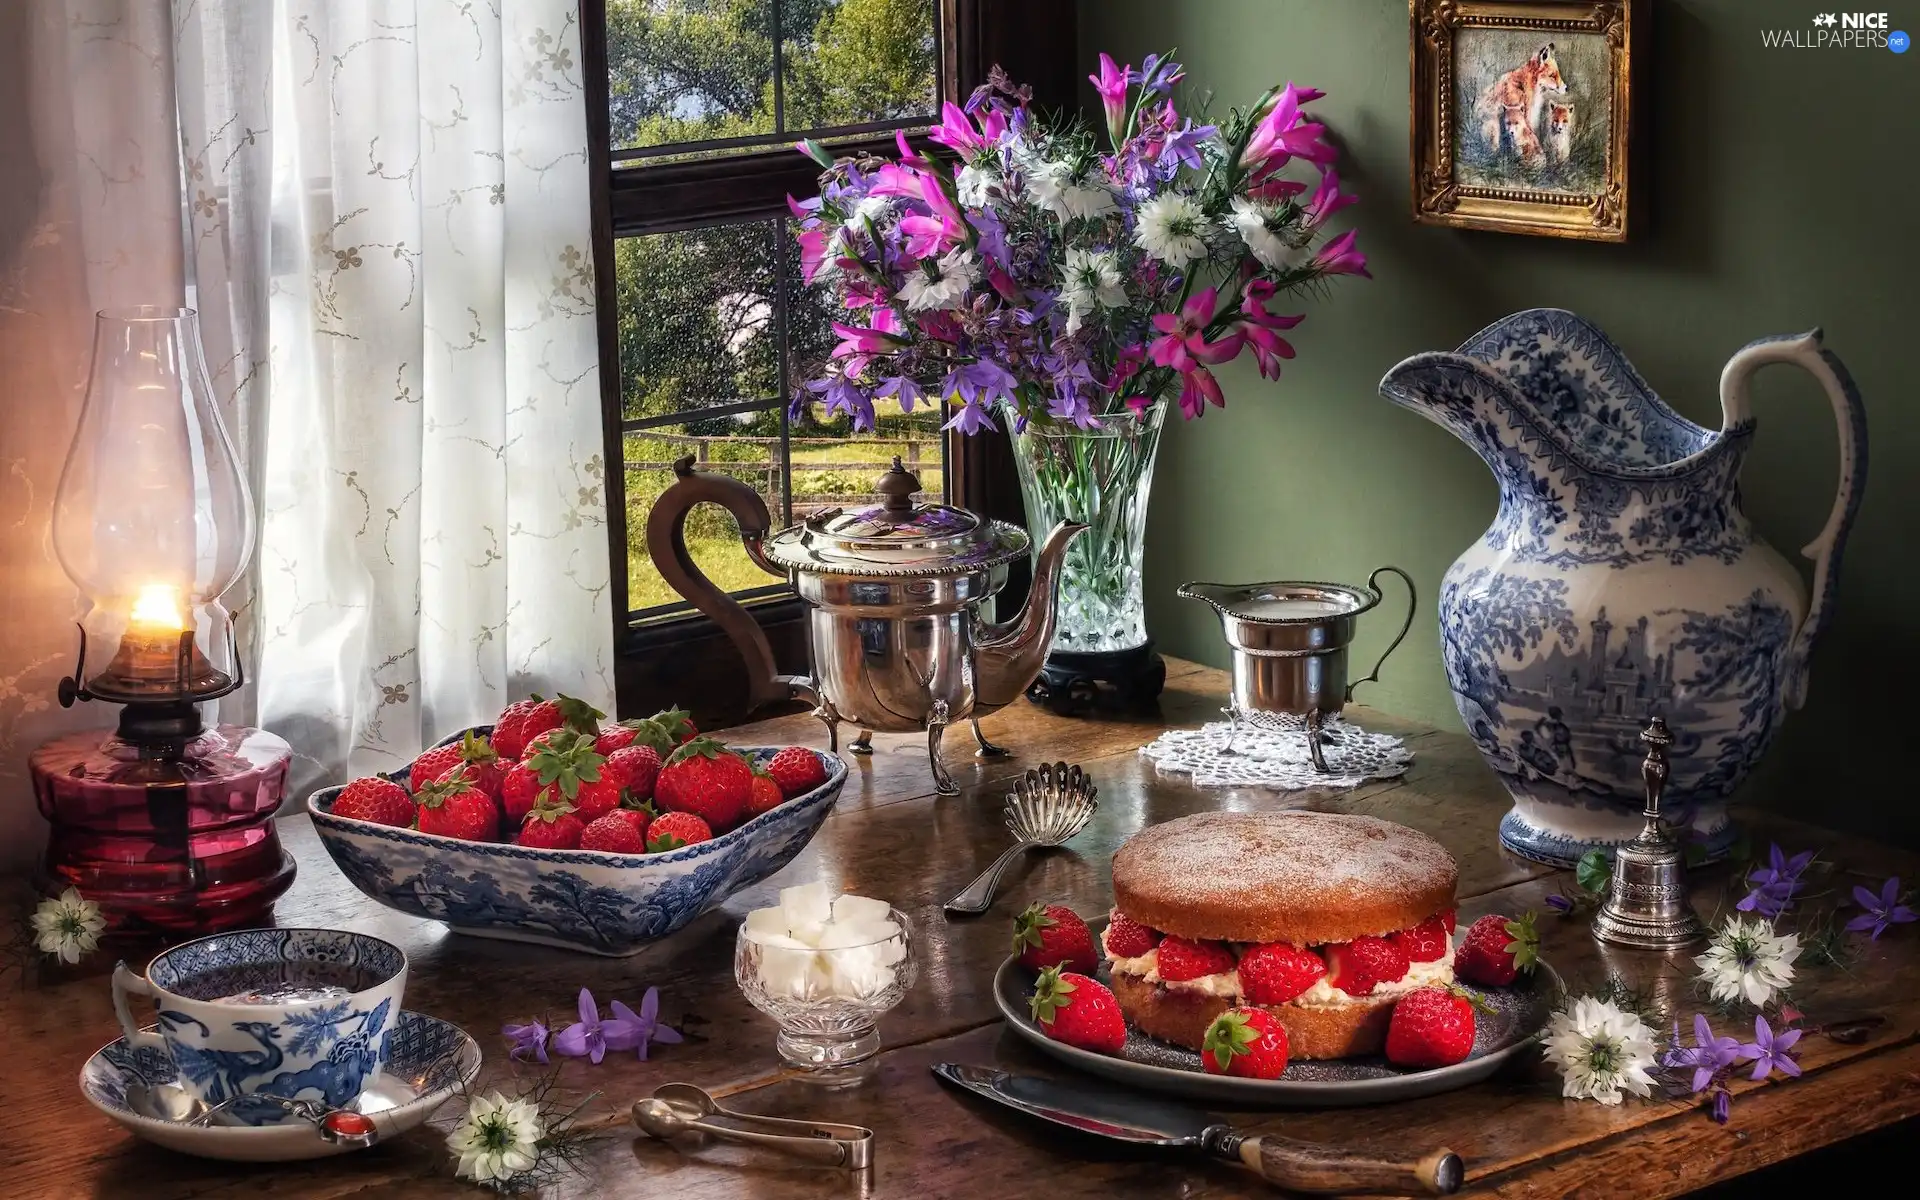 Window, composition, curtain, Bouquet of Flowers, cake, Lamp, strawberries, jug, picture